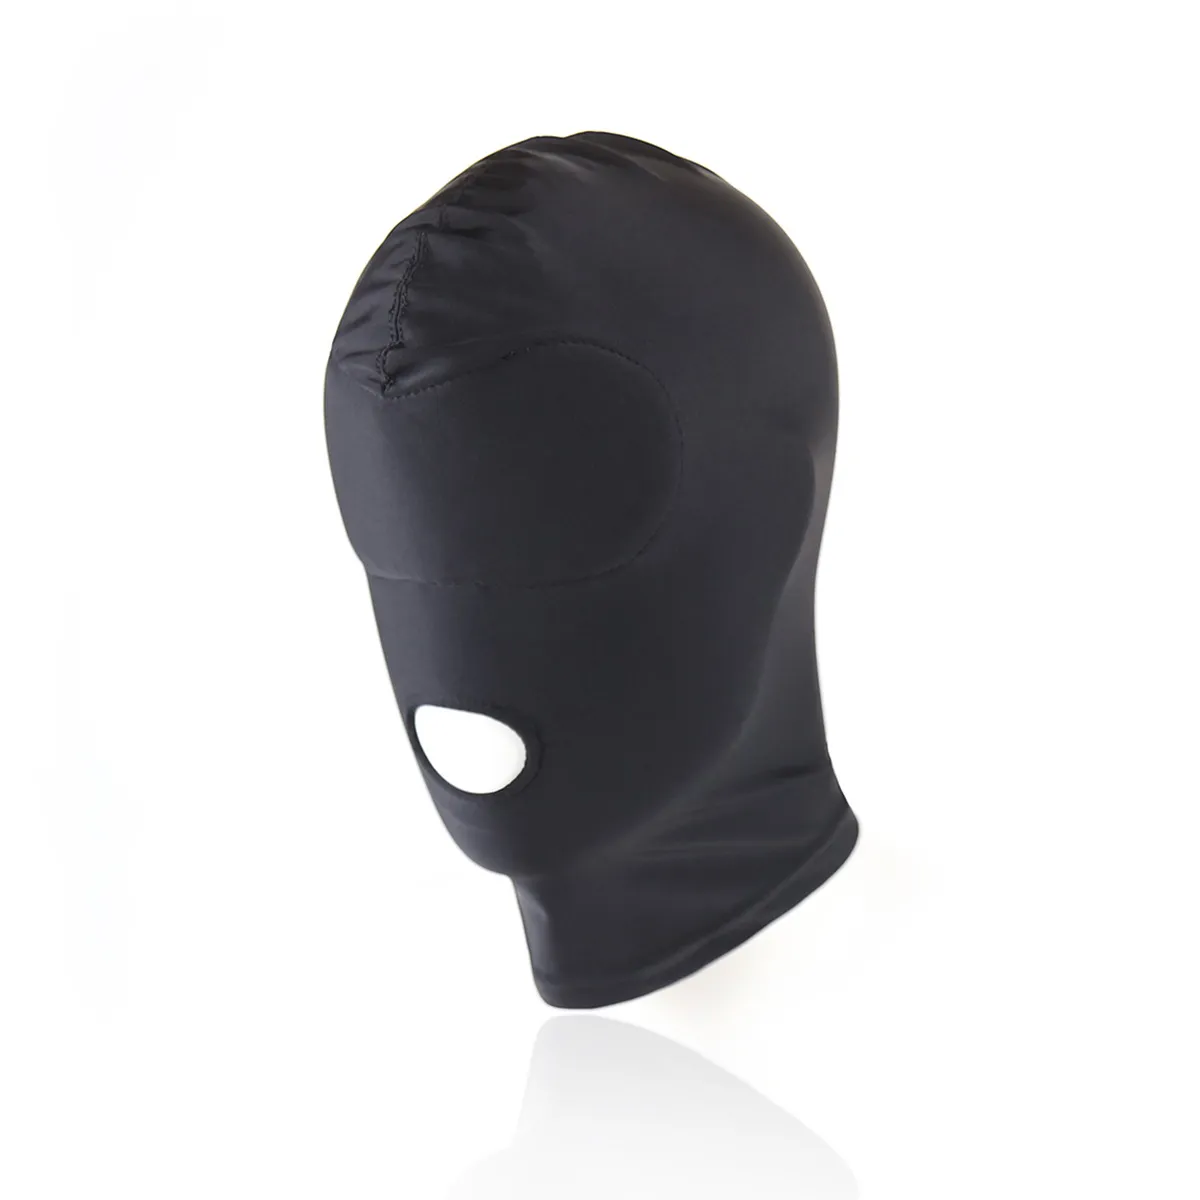 Sexy PU Leather Latex Hood Black Mask 4 tyles Breathable Headpiece Fetish BDSM Adult for party5633494